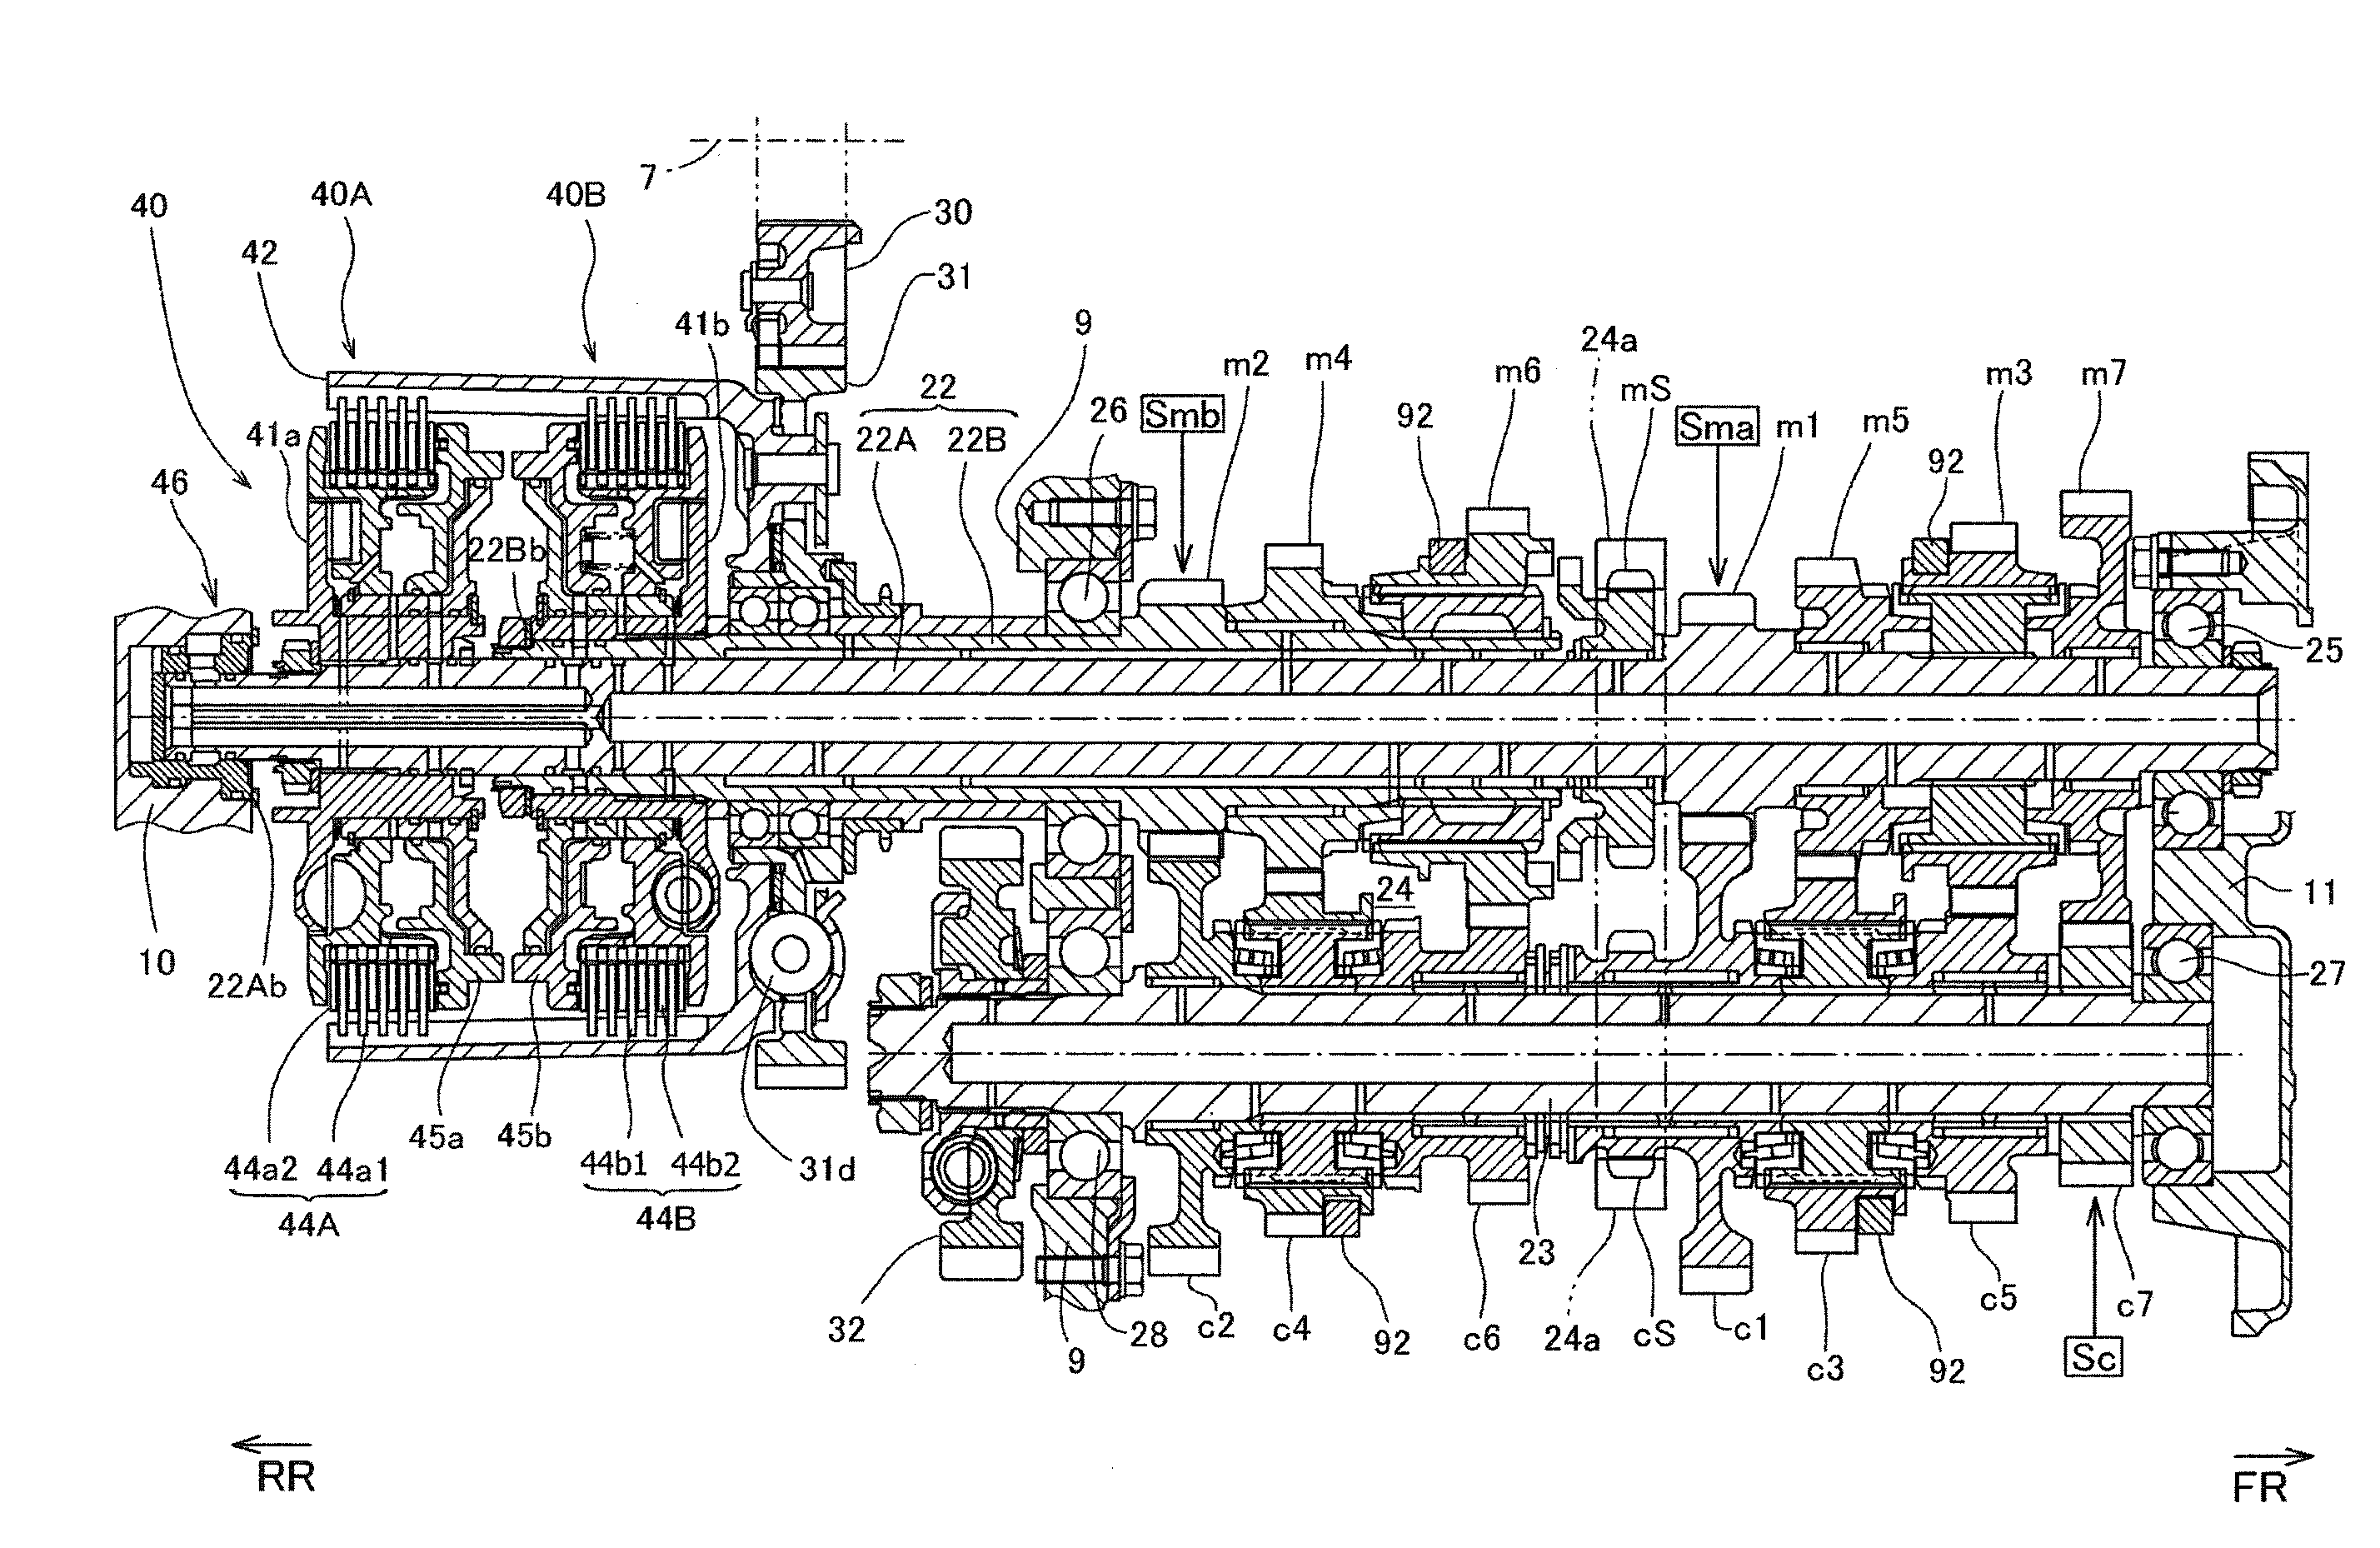 Synchronizer-mechanism-equipped transmission